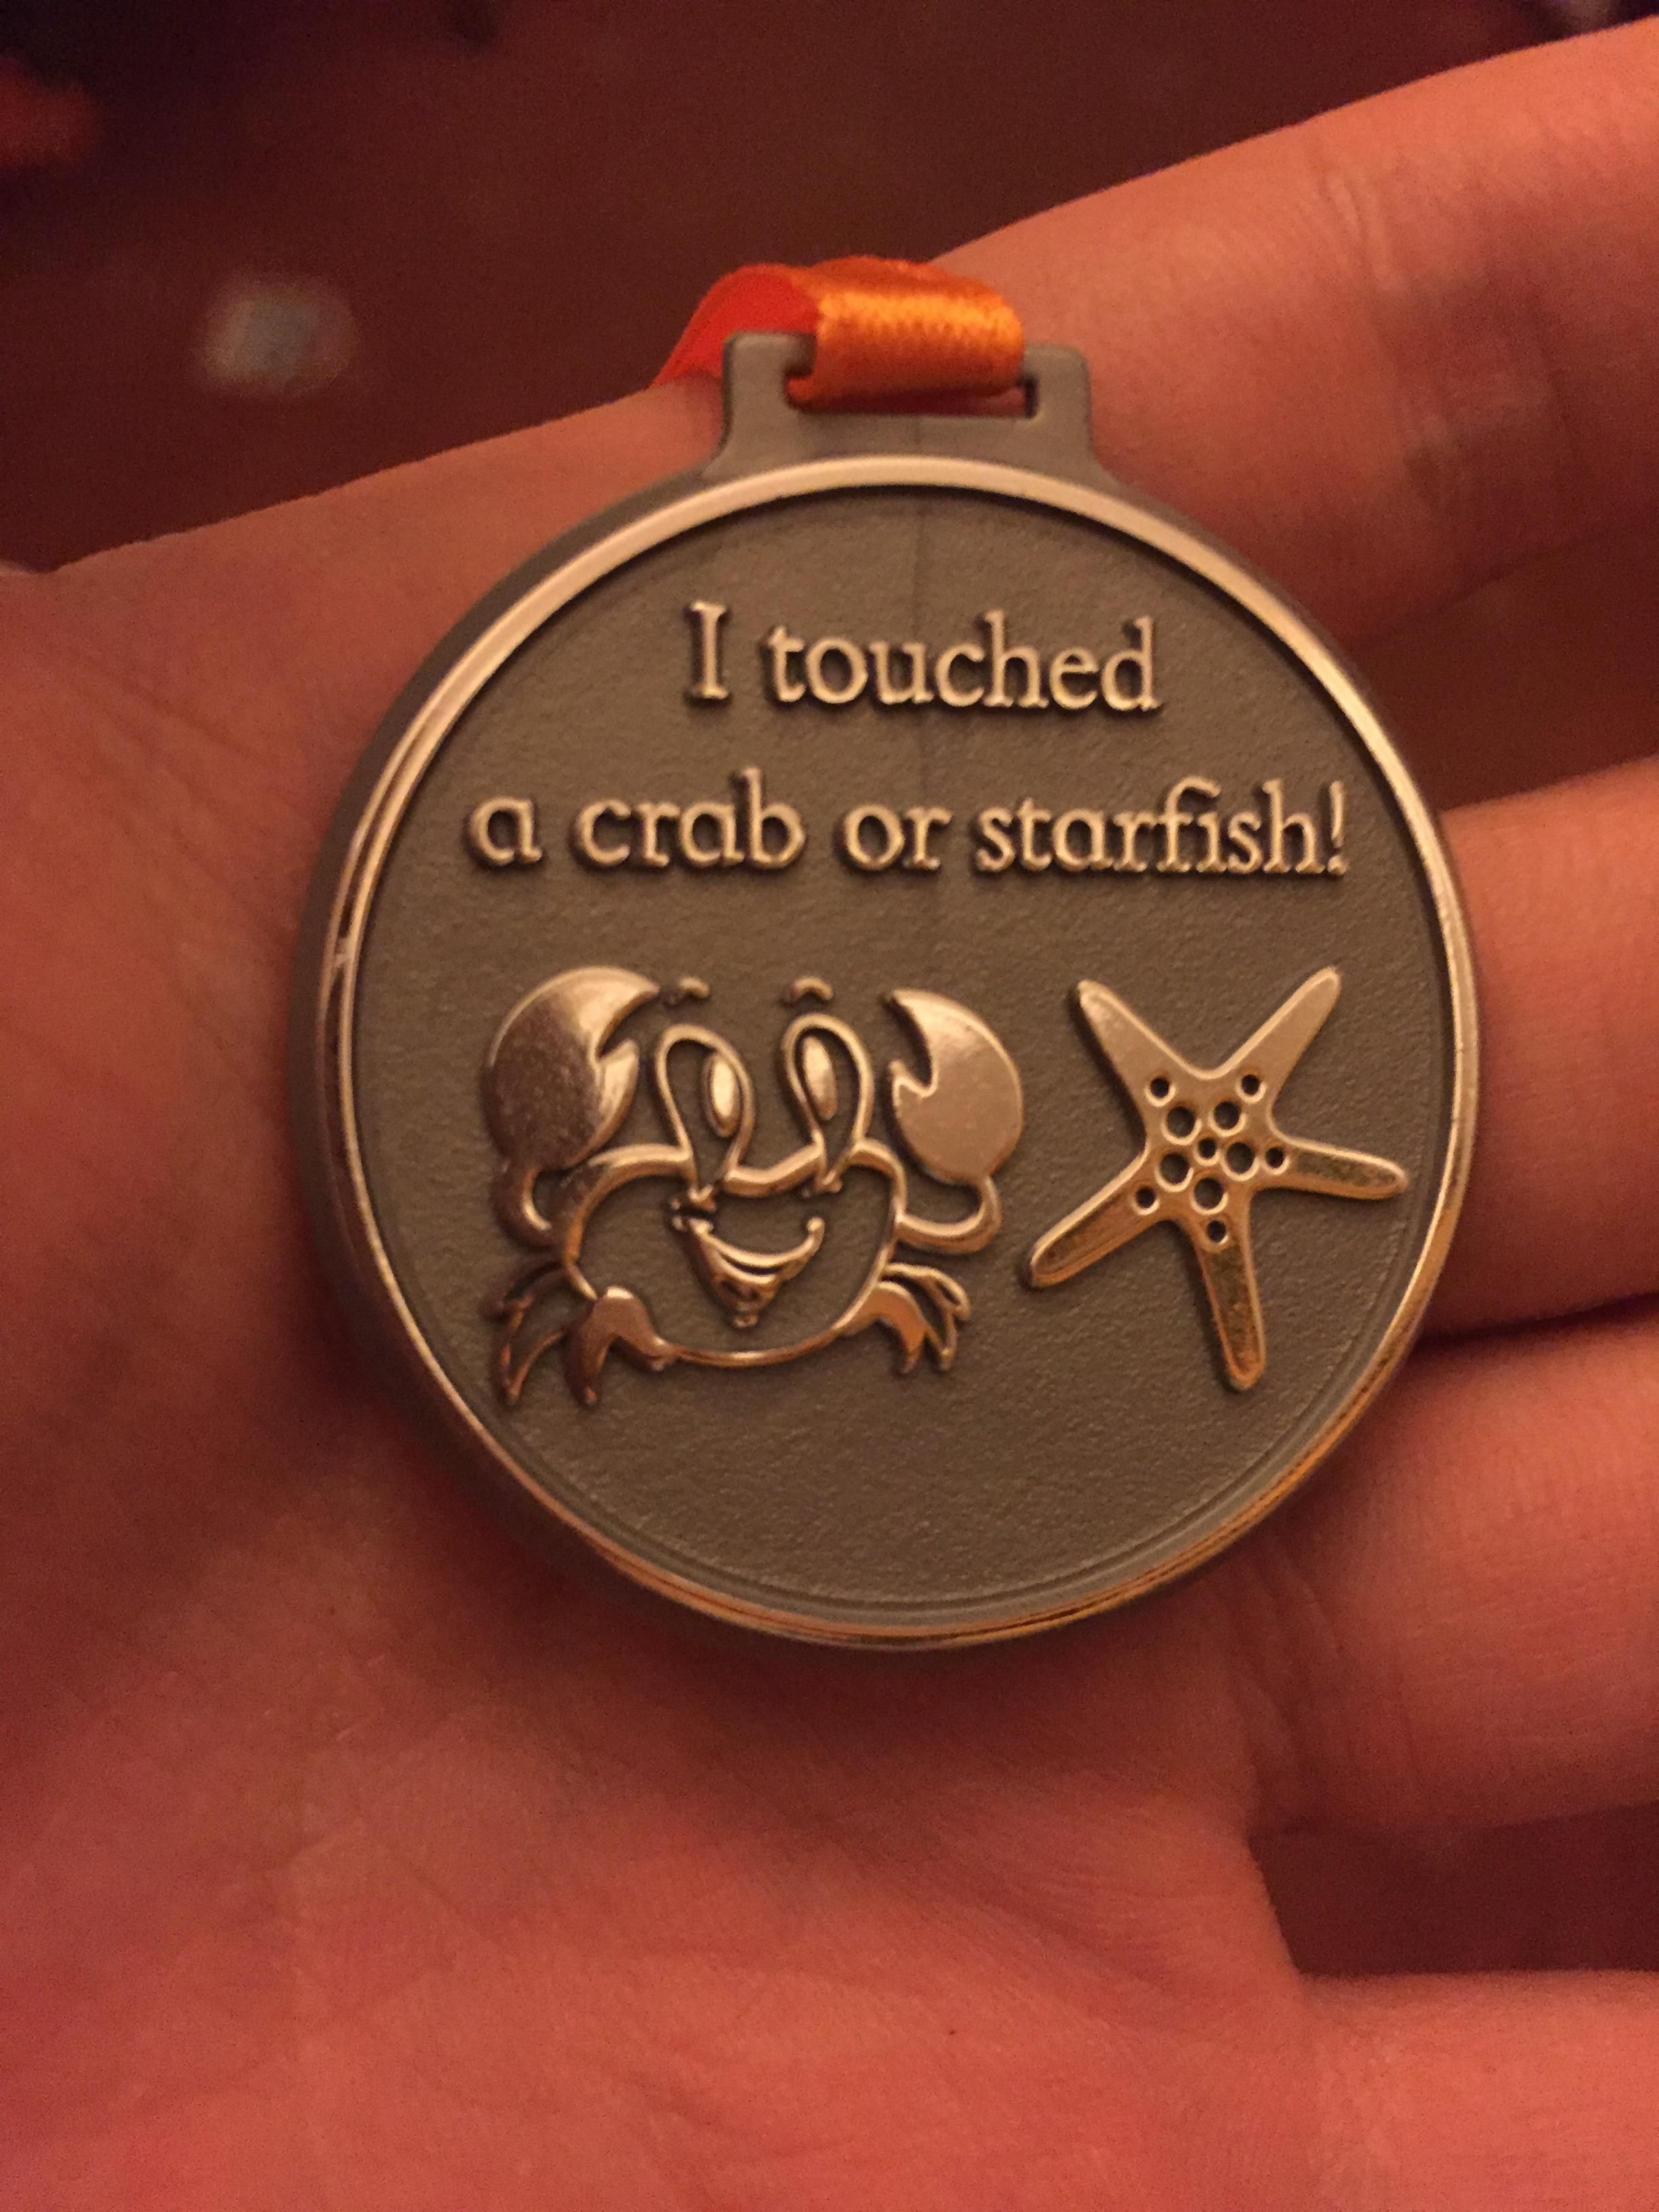 This really ambiguous "medal" I got from a Sea Life Centre